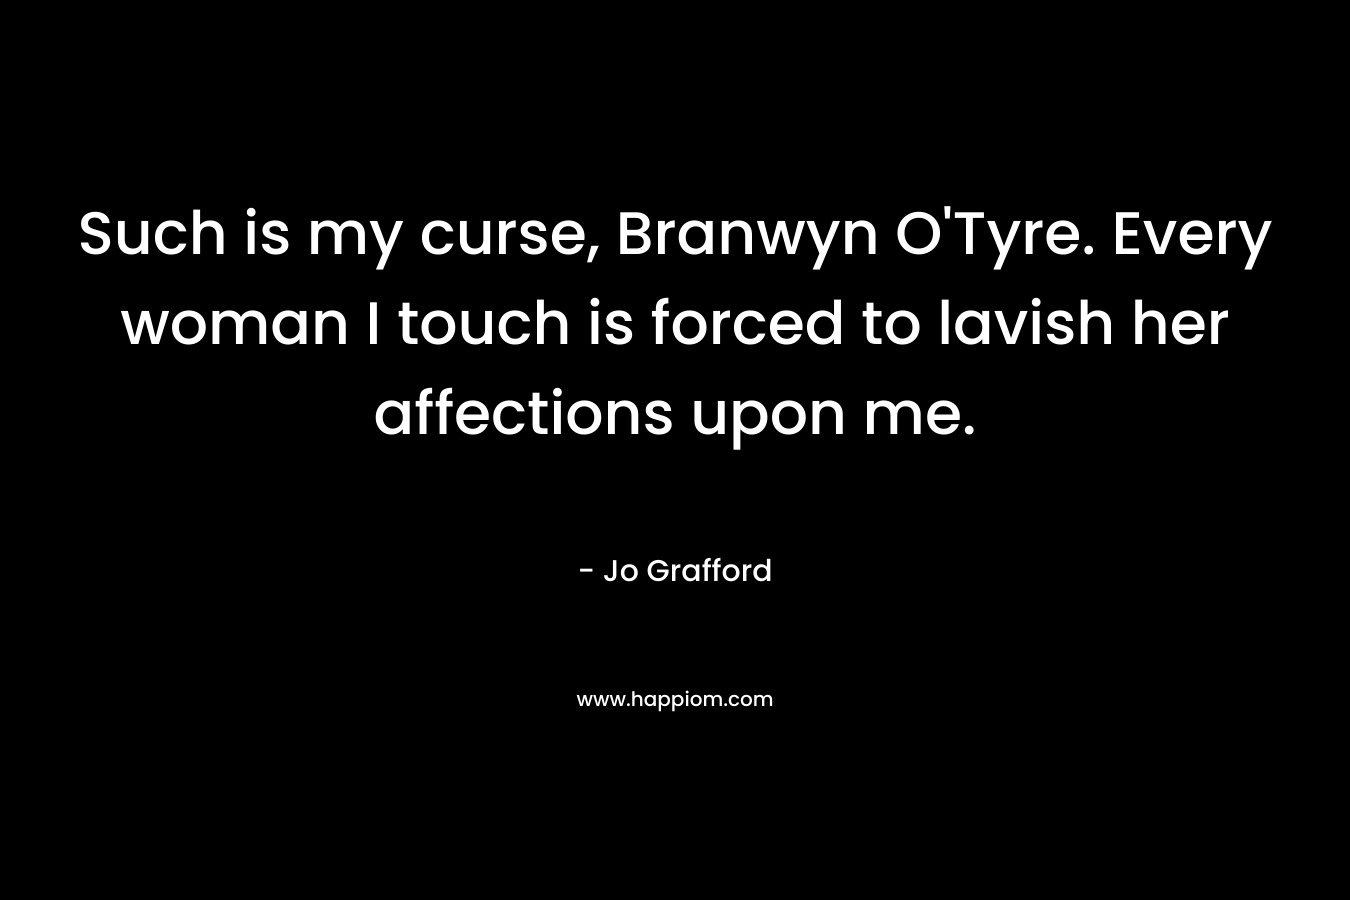 Such is my curse, Branwyn O'Tyre. Every woman I touch is forced to lavish her affections upon me.